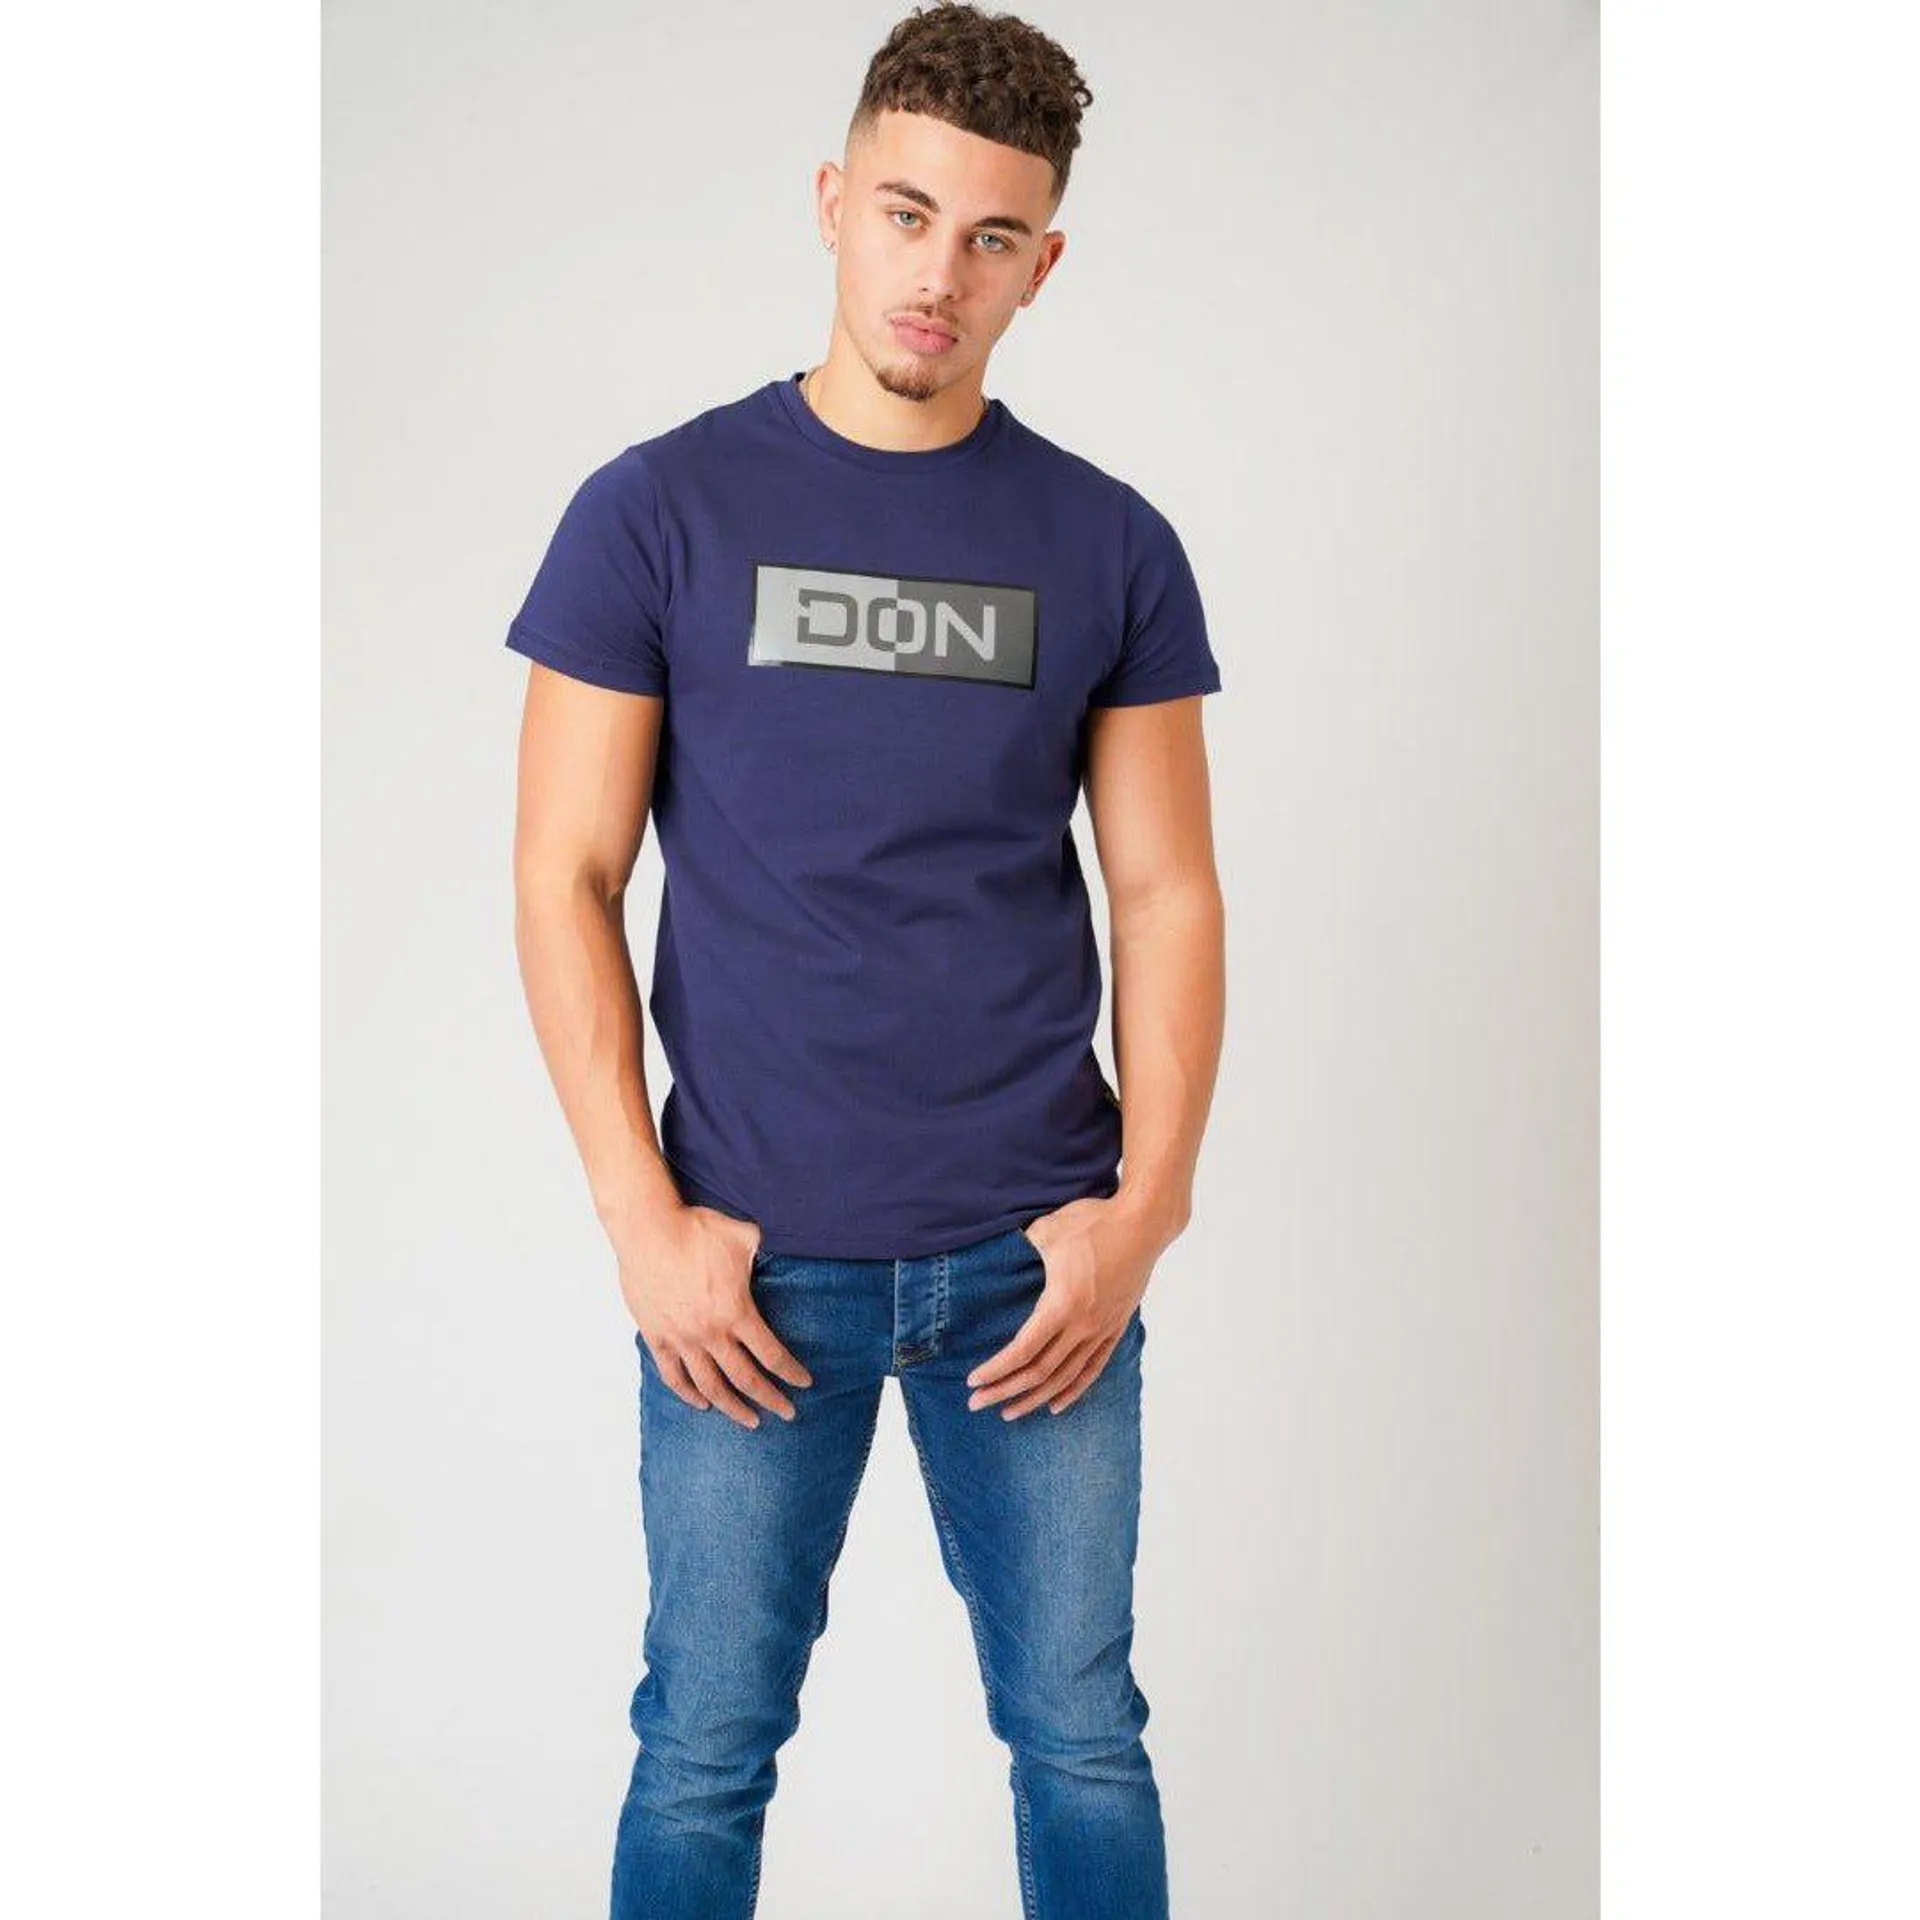 Don Jeans Don 50/50 T-Shirt Navy